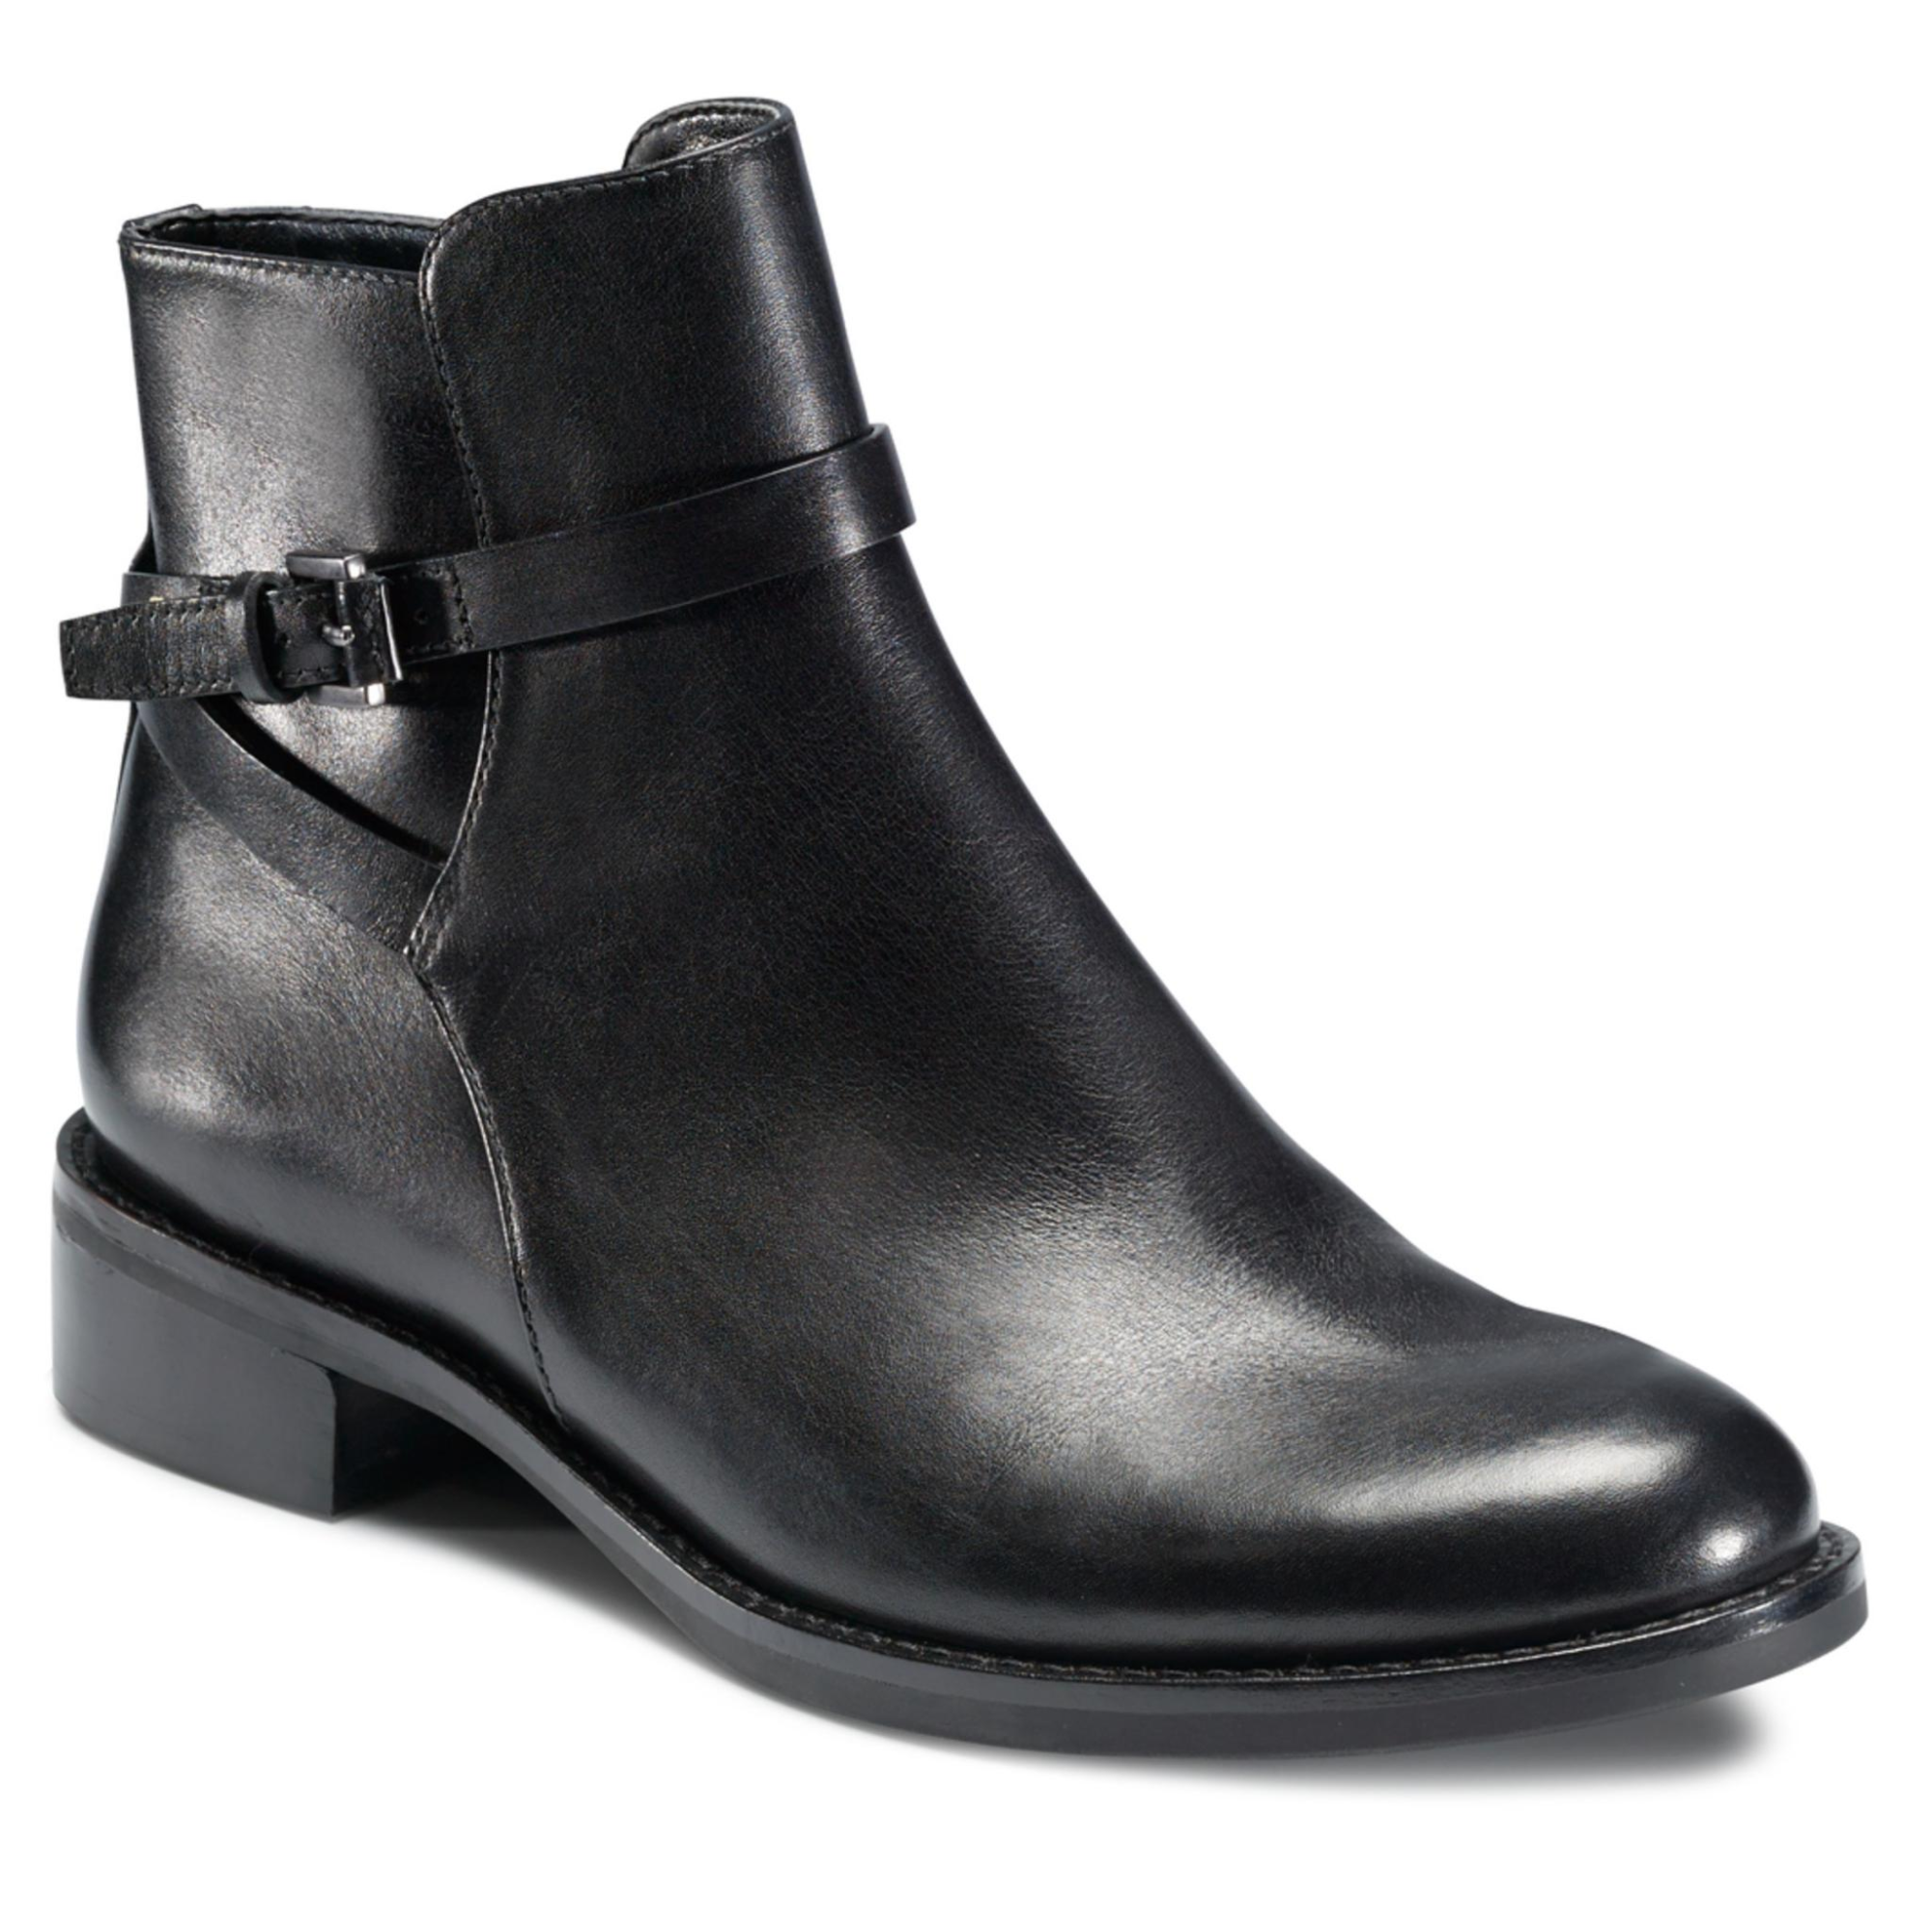 Ecco Hobart Strap Boot 40 - Products - Veryk Mall Veryk Mall, many product, quick safe your money!